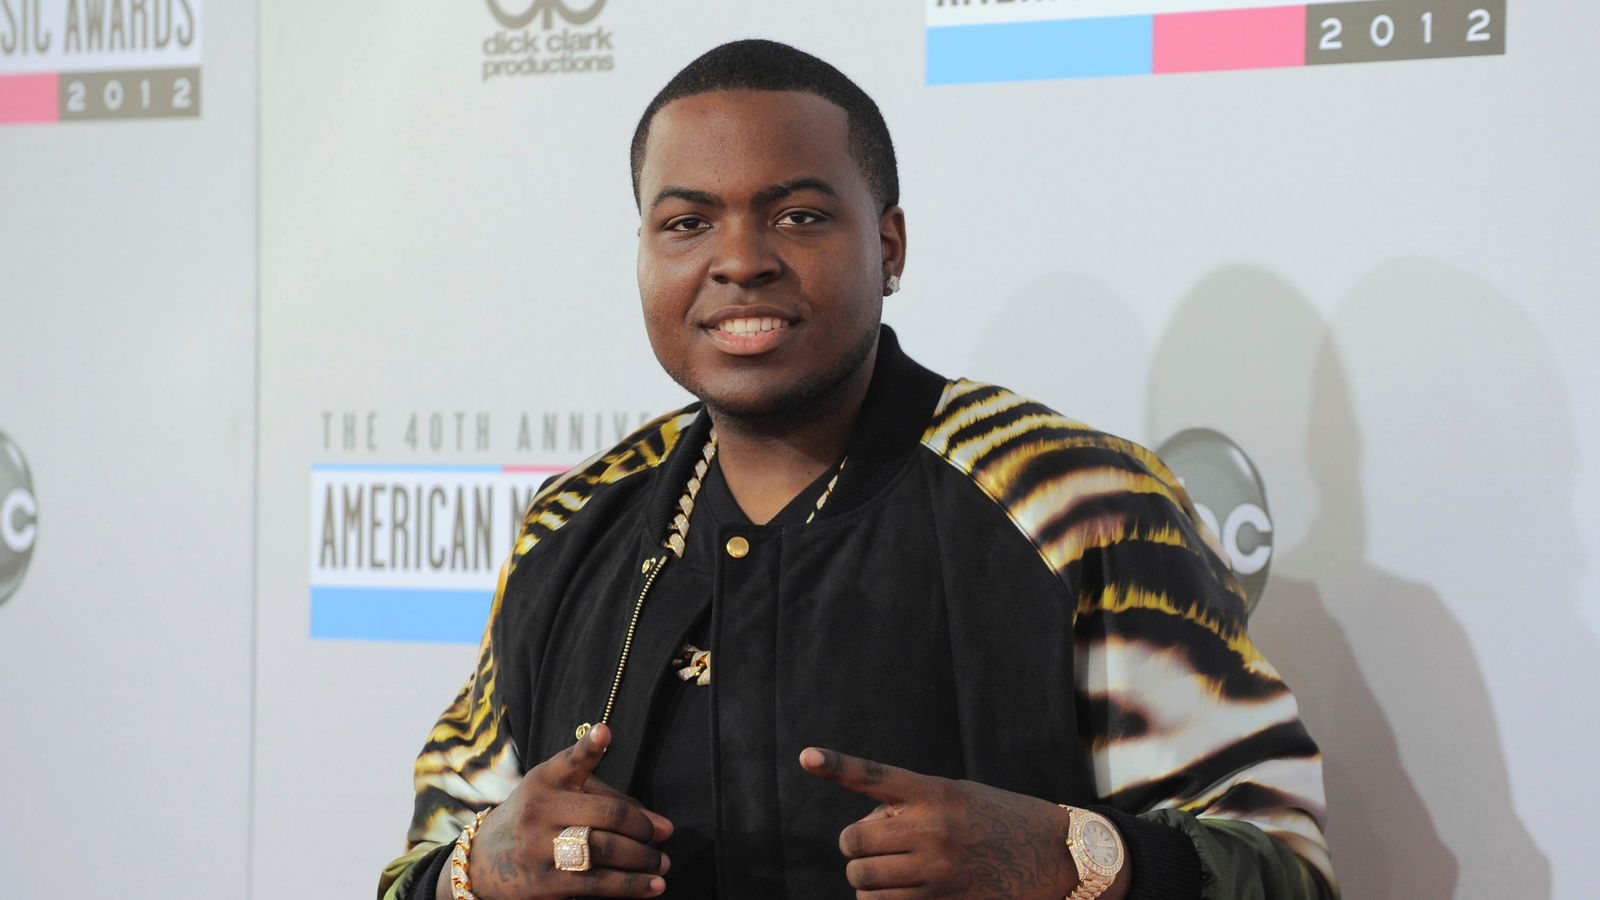 Sean Kingston's home raided 'over 0,000 TV payment' - as his mother arrested